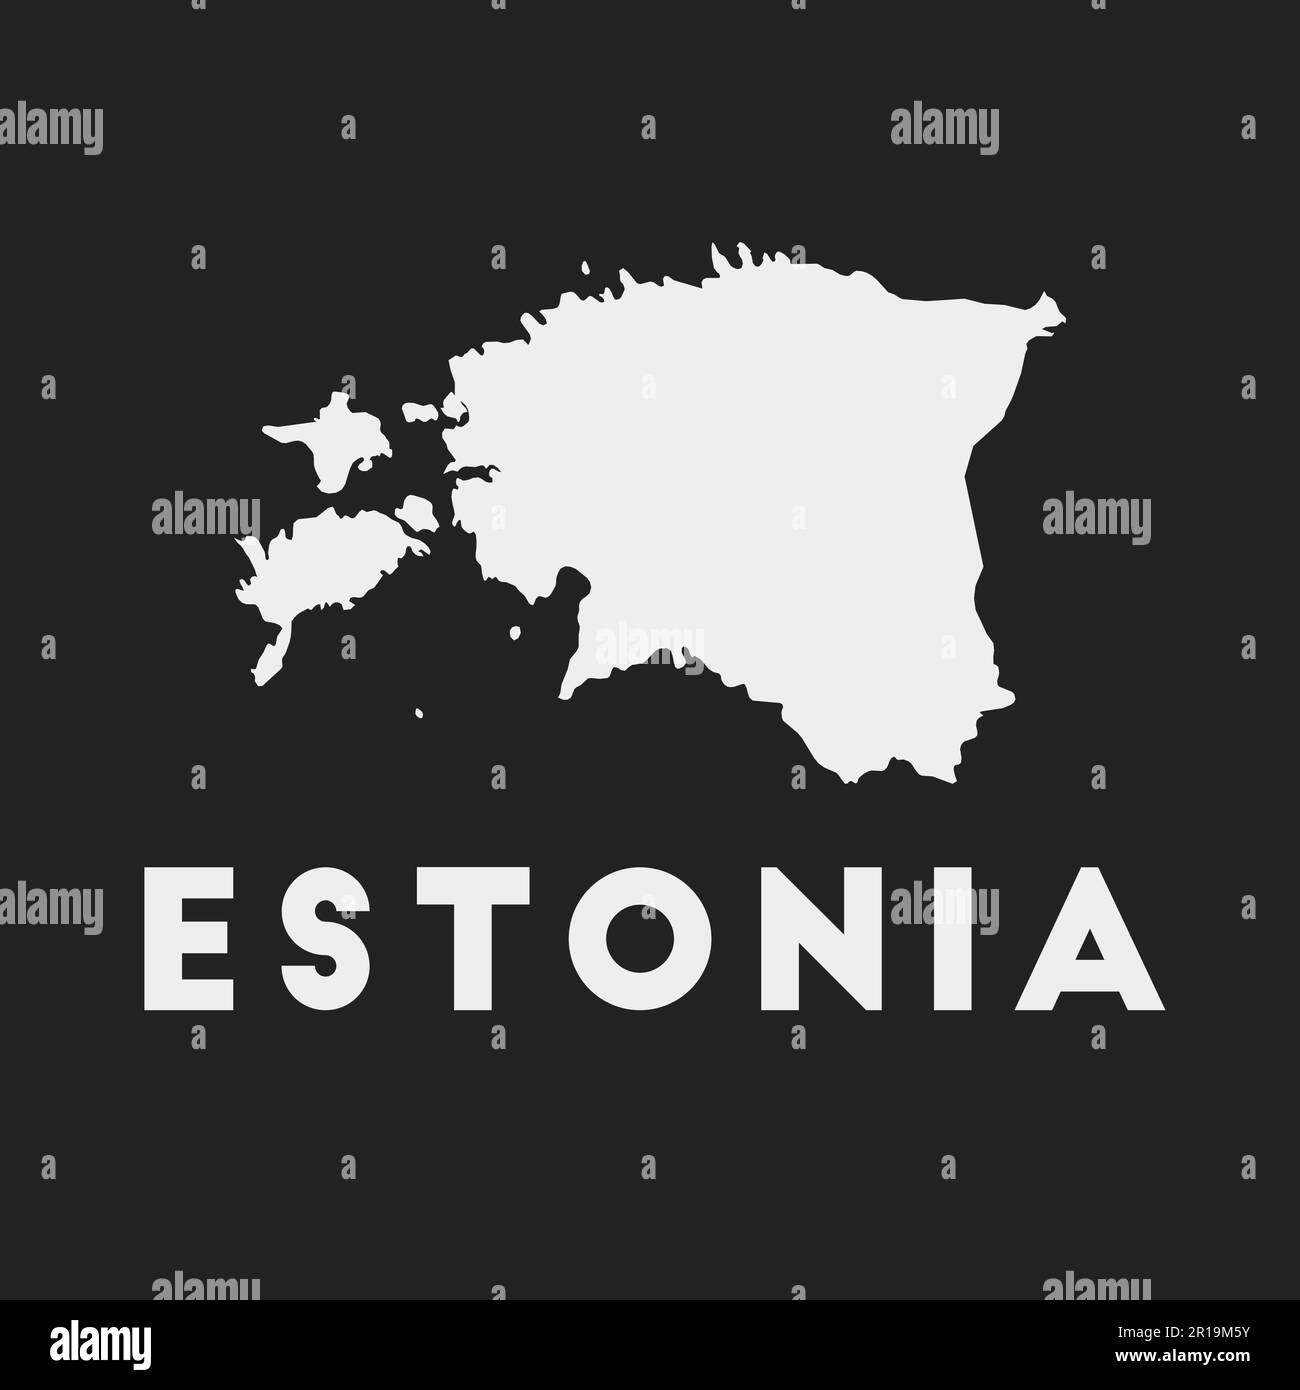 Estonia icon. Country map on dark background. Stylish Estonia map with country name. Vector illustration. Stock Vector